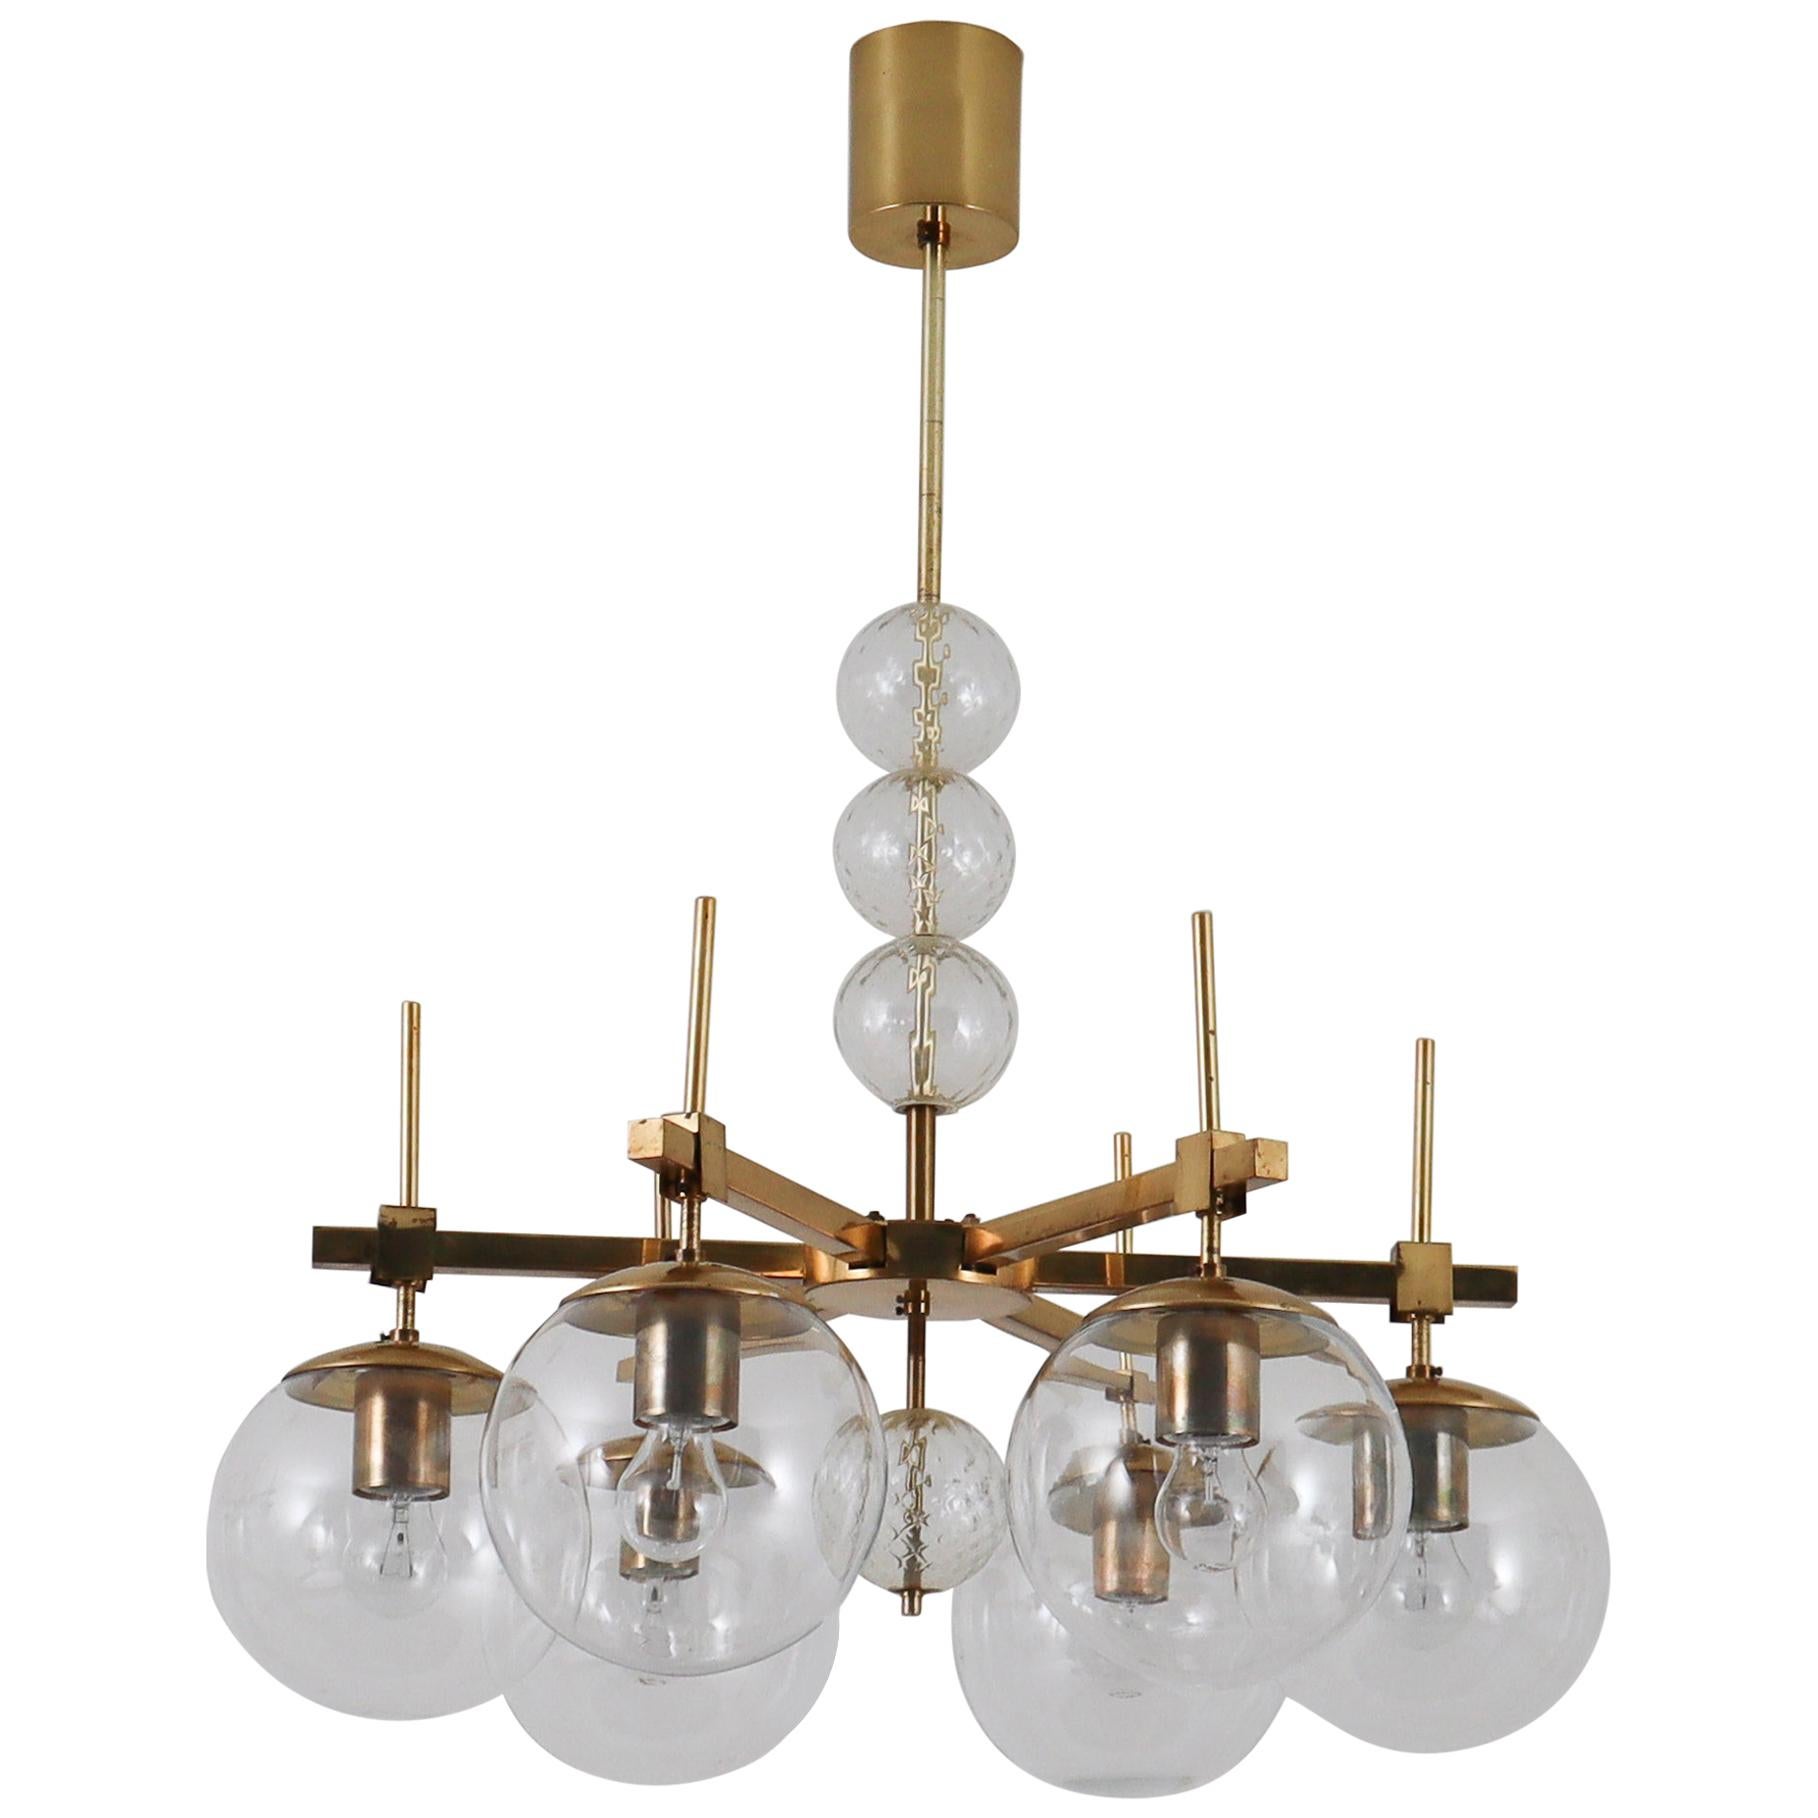 Midcentury Chandelier with Brass Fixture and Hand Blown Glass, Europe